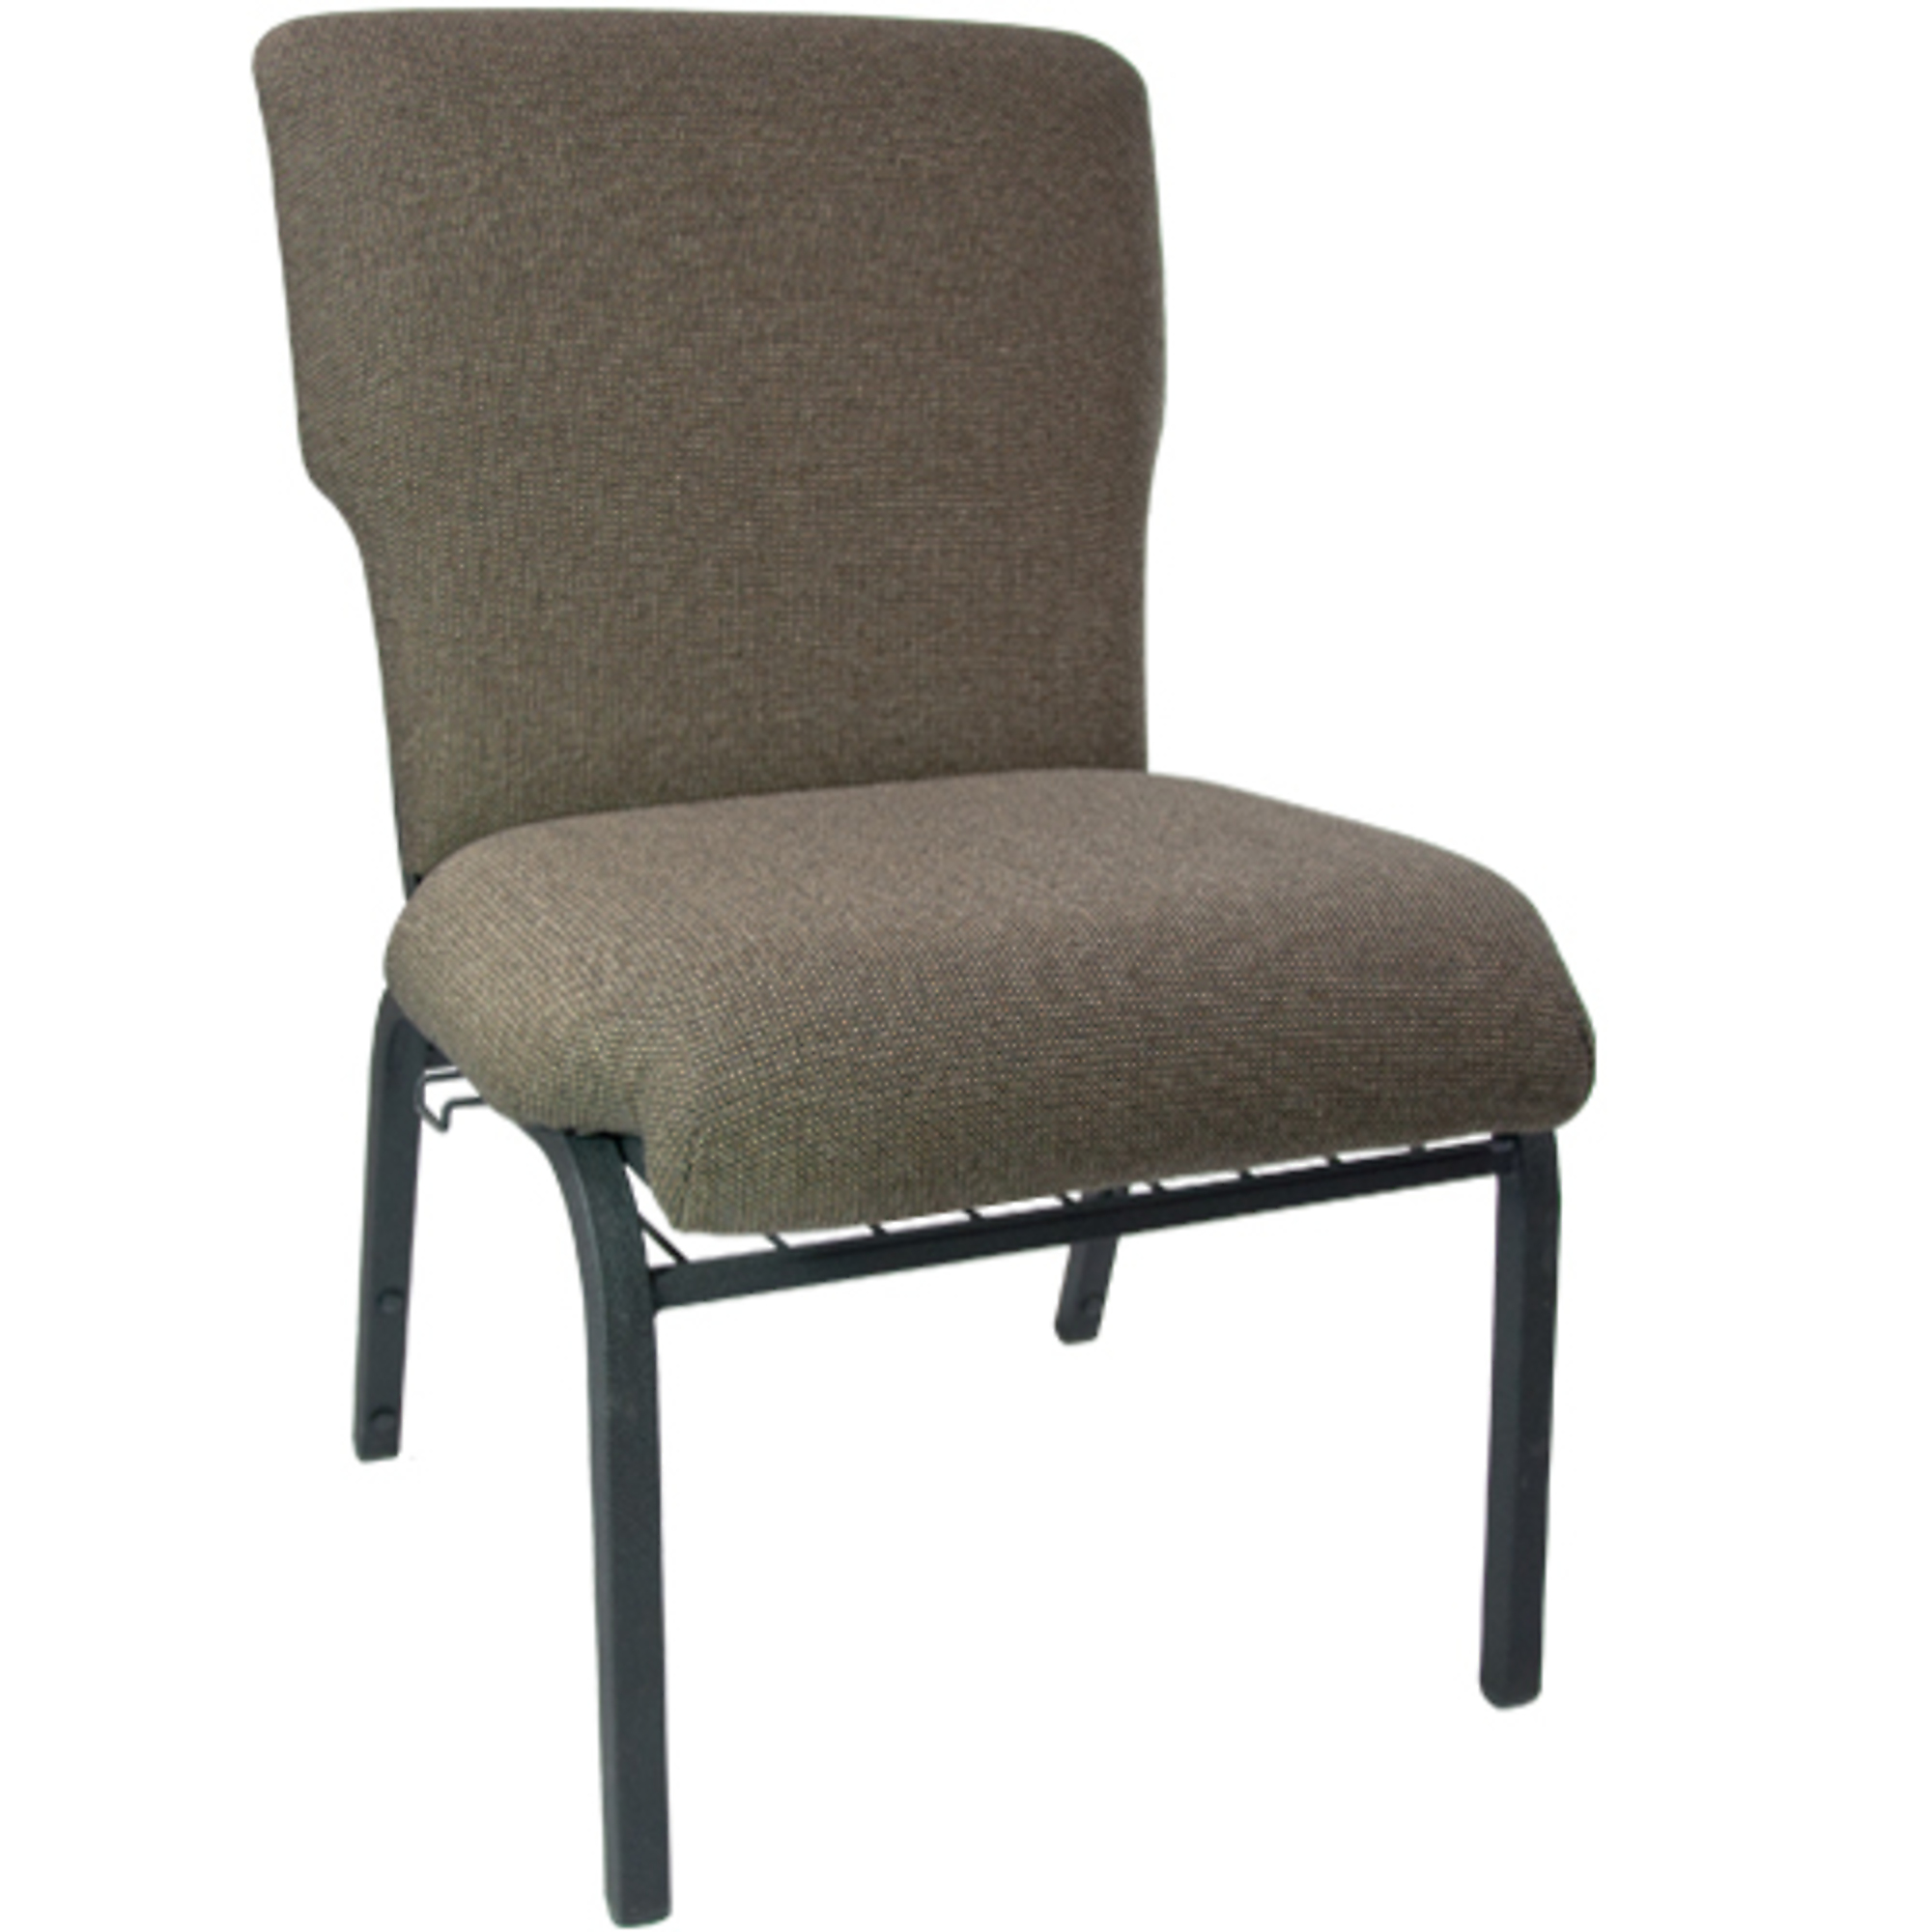 Flash Furniture, Jute Discount Church Chair - 21Inch Wide, Primary Color Brown, Included (qty.) 1, Model EPCHT112